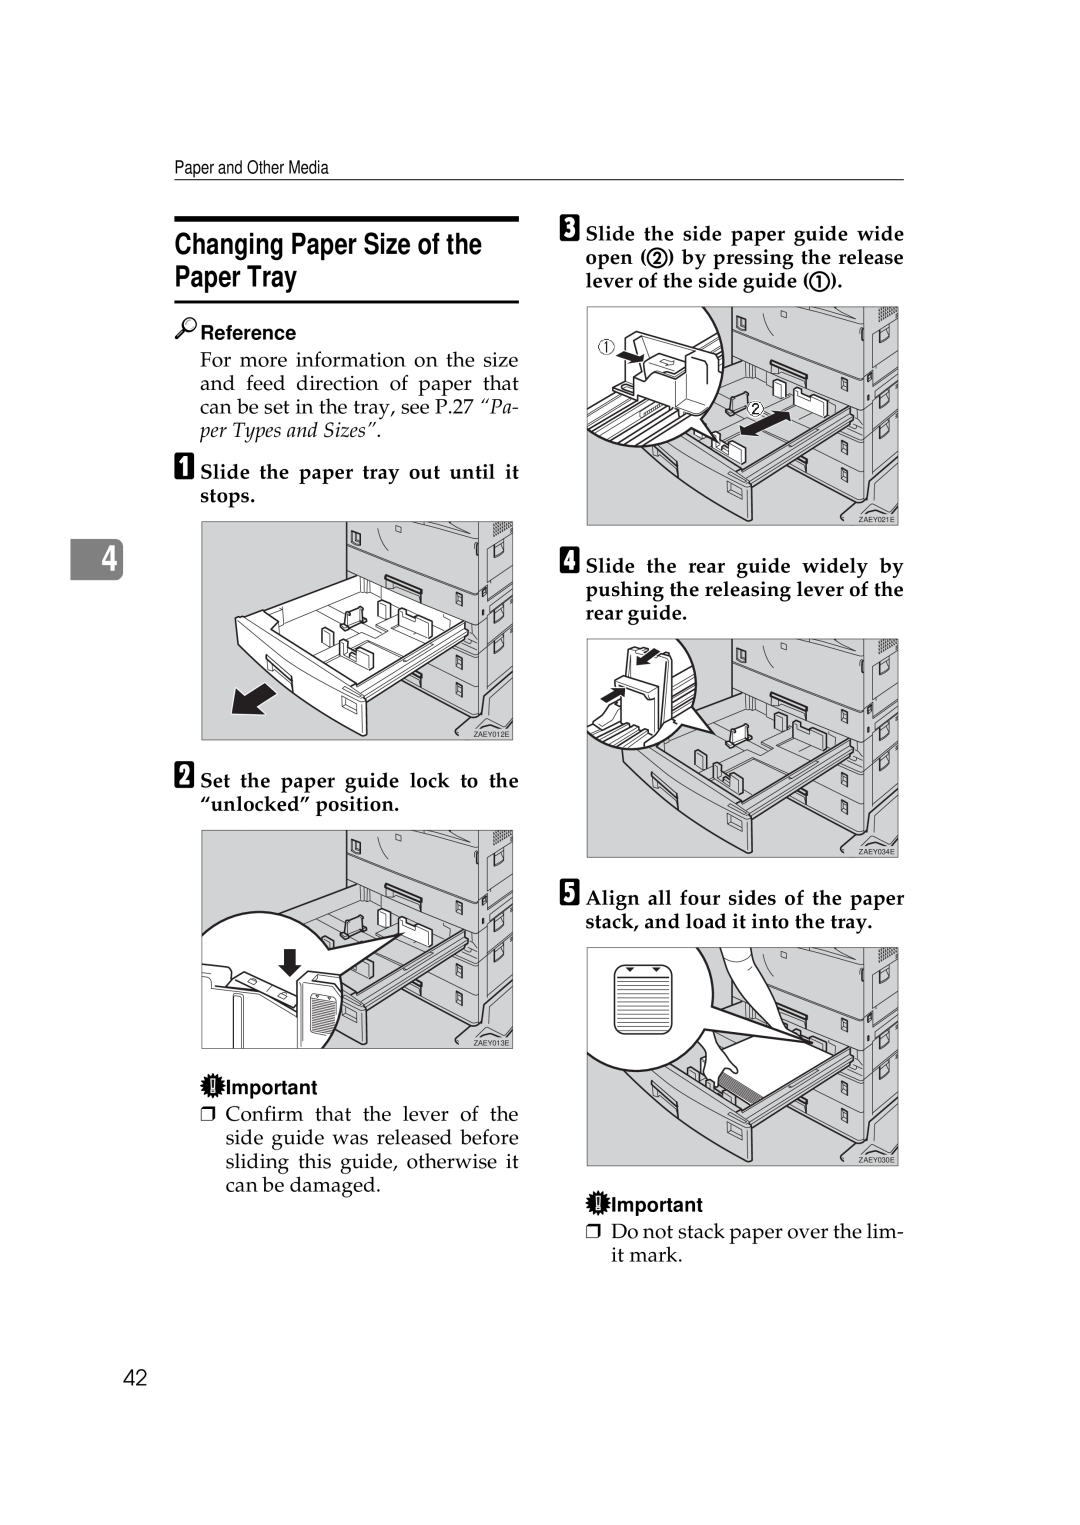 Ricoh Aficio AP2700 operating instructions Changing Paper Size of the Paper Tray, Reference 